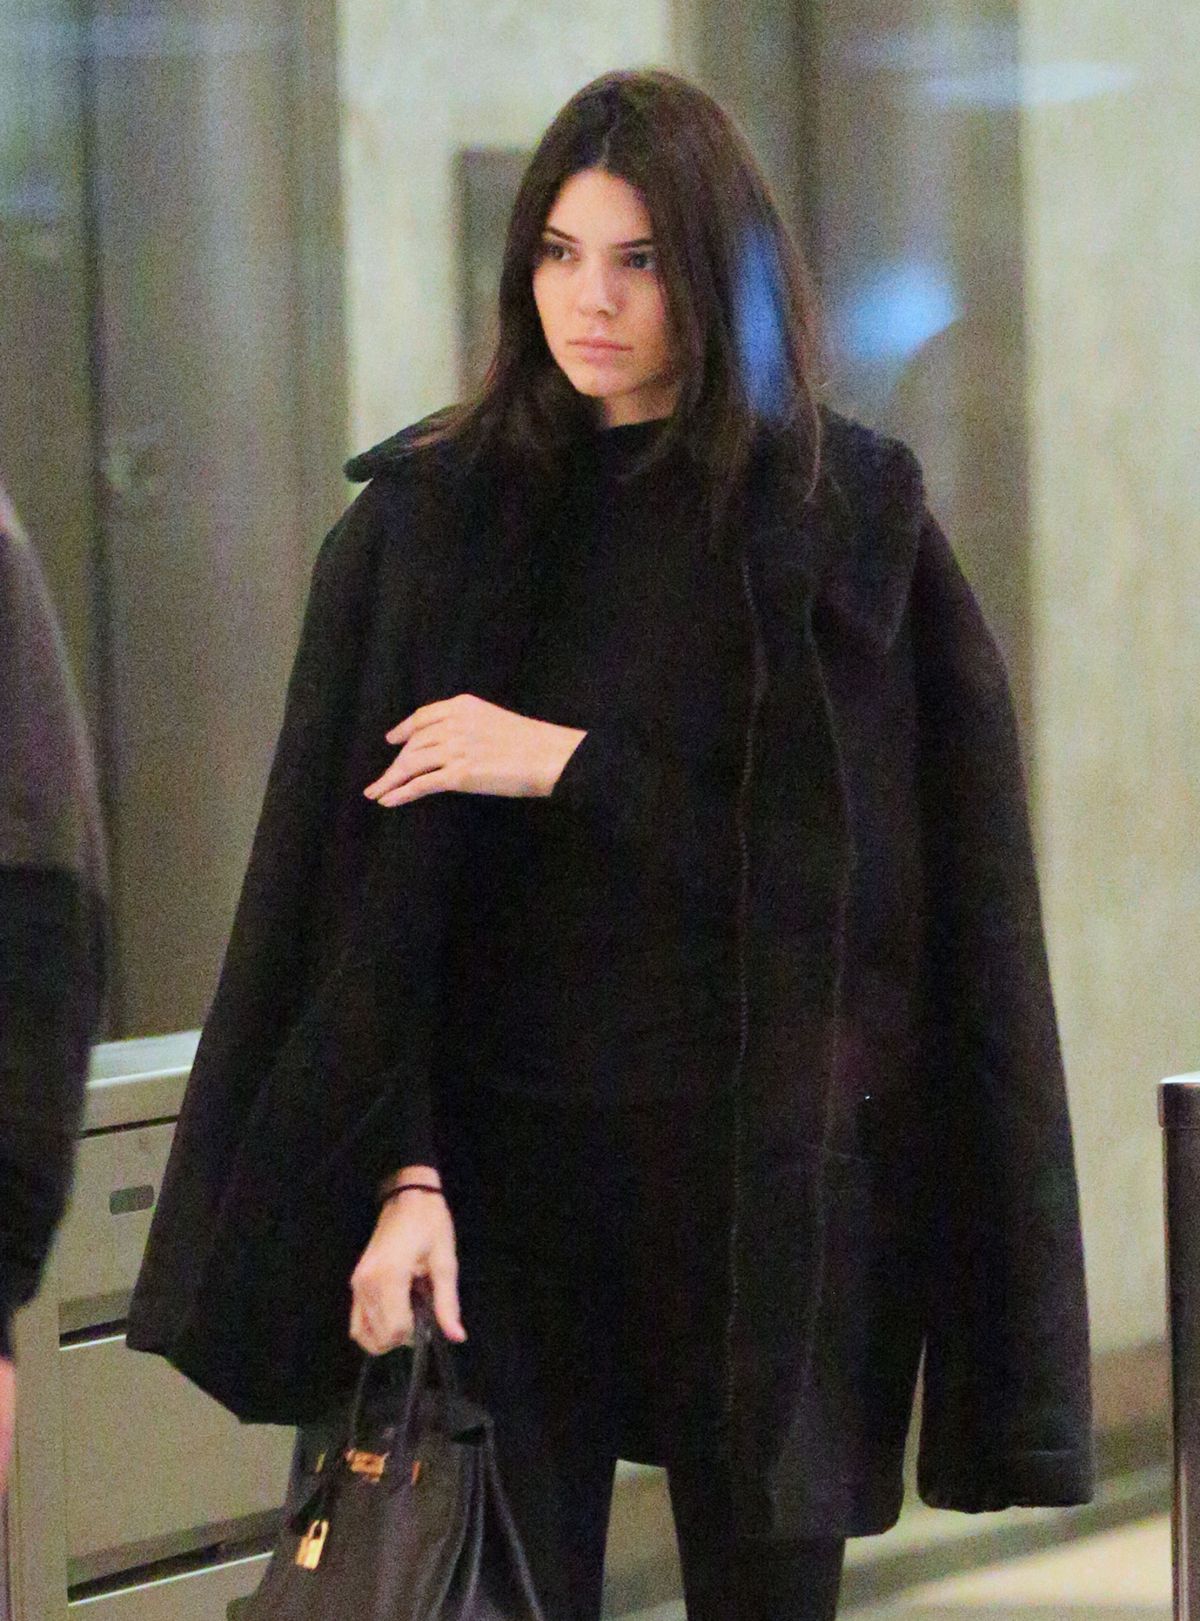 KENDALL JENNER at Victoria’s Secret Offices in New York 11/08/2015 ...